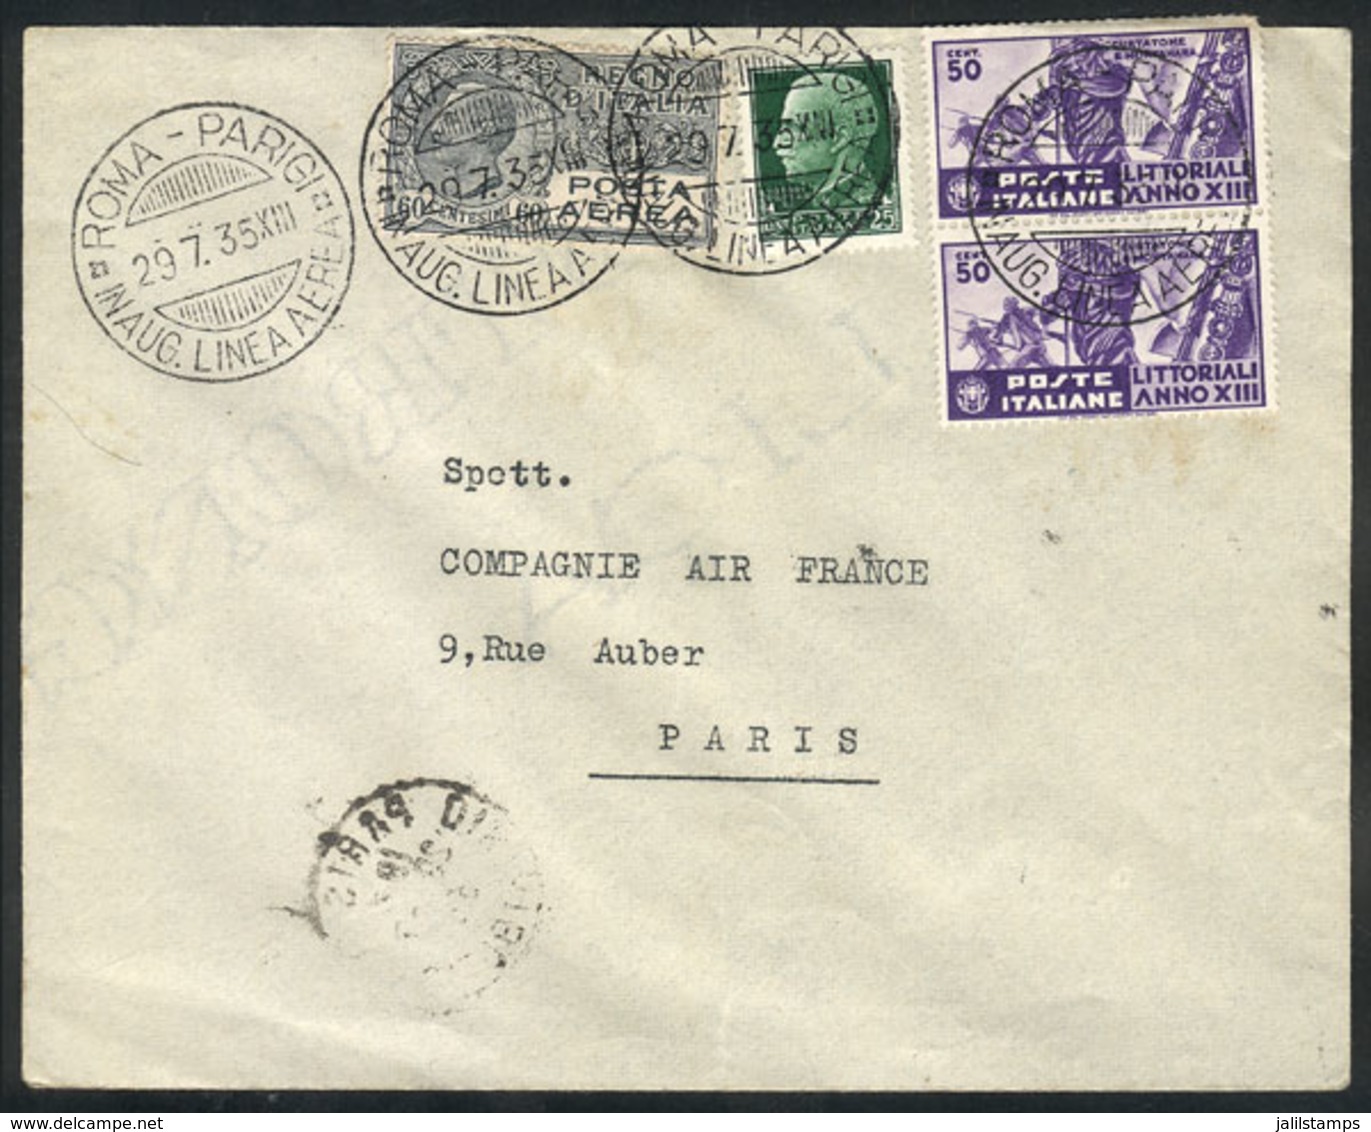 725 ITALY: 29/JUL/1935 Roma - Paris: First Flight By Air France, Cover Of Very Fine Quality! - Zonder Classificatie